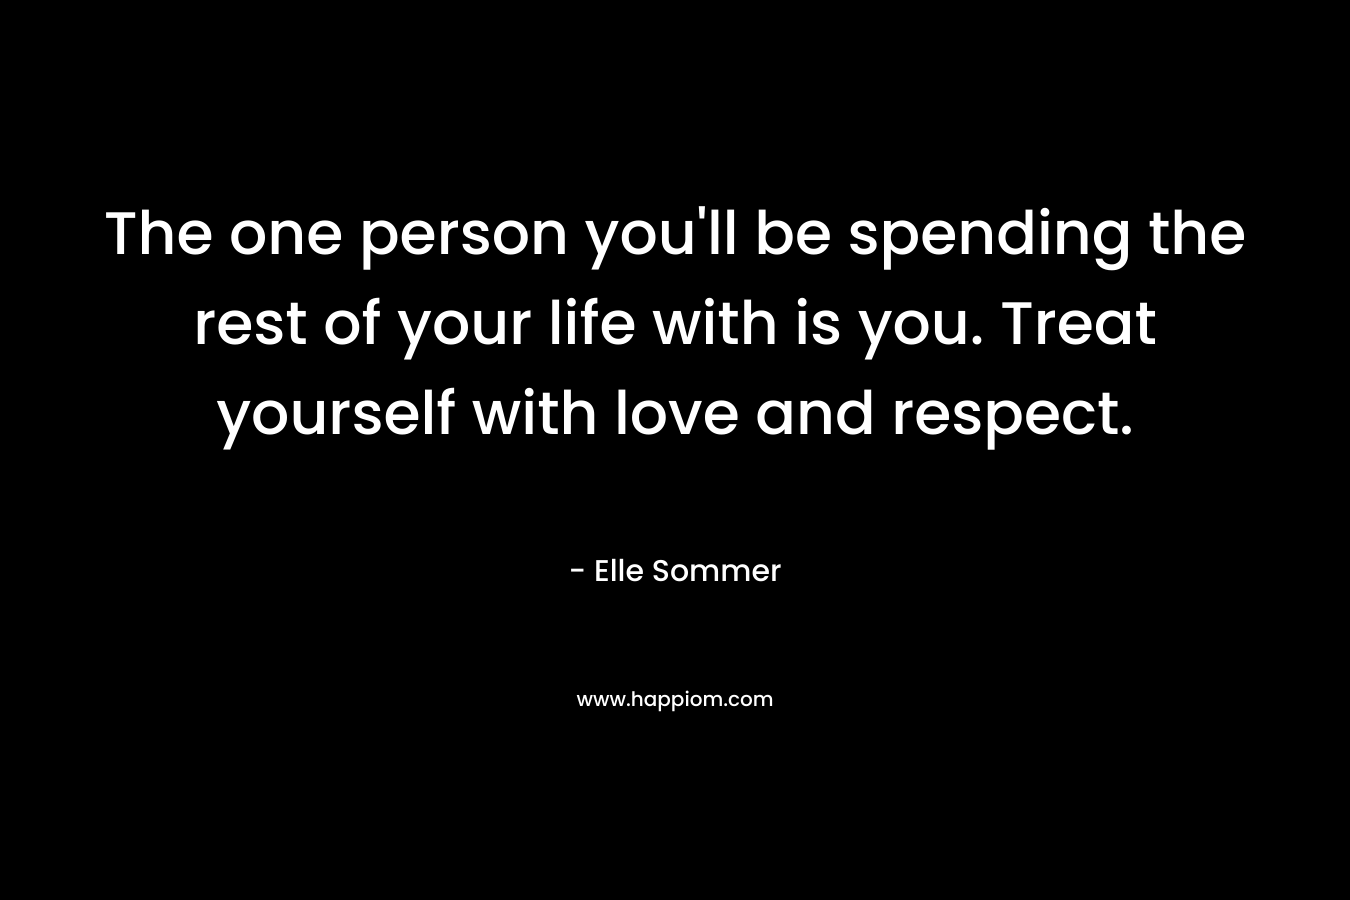 The one person you’ll be spending the rest of your life with is you. Treat yourself with love and respect. – Elle Sommer